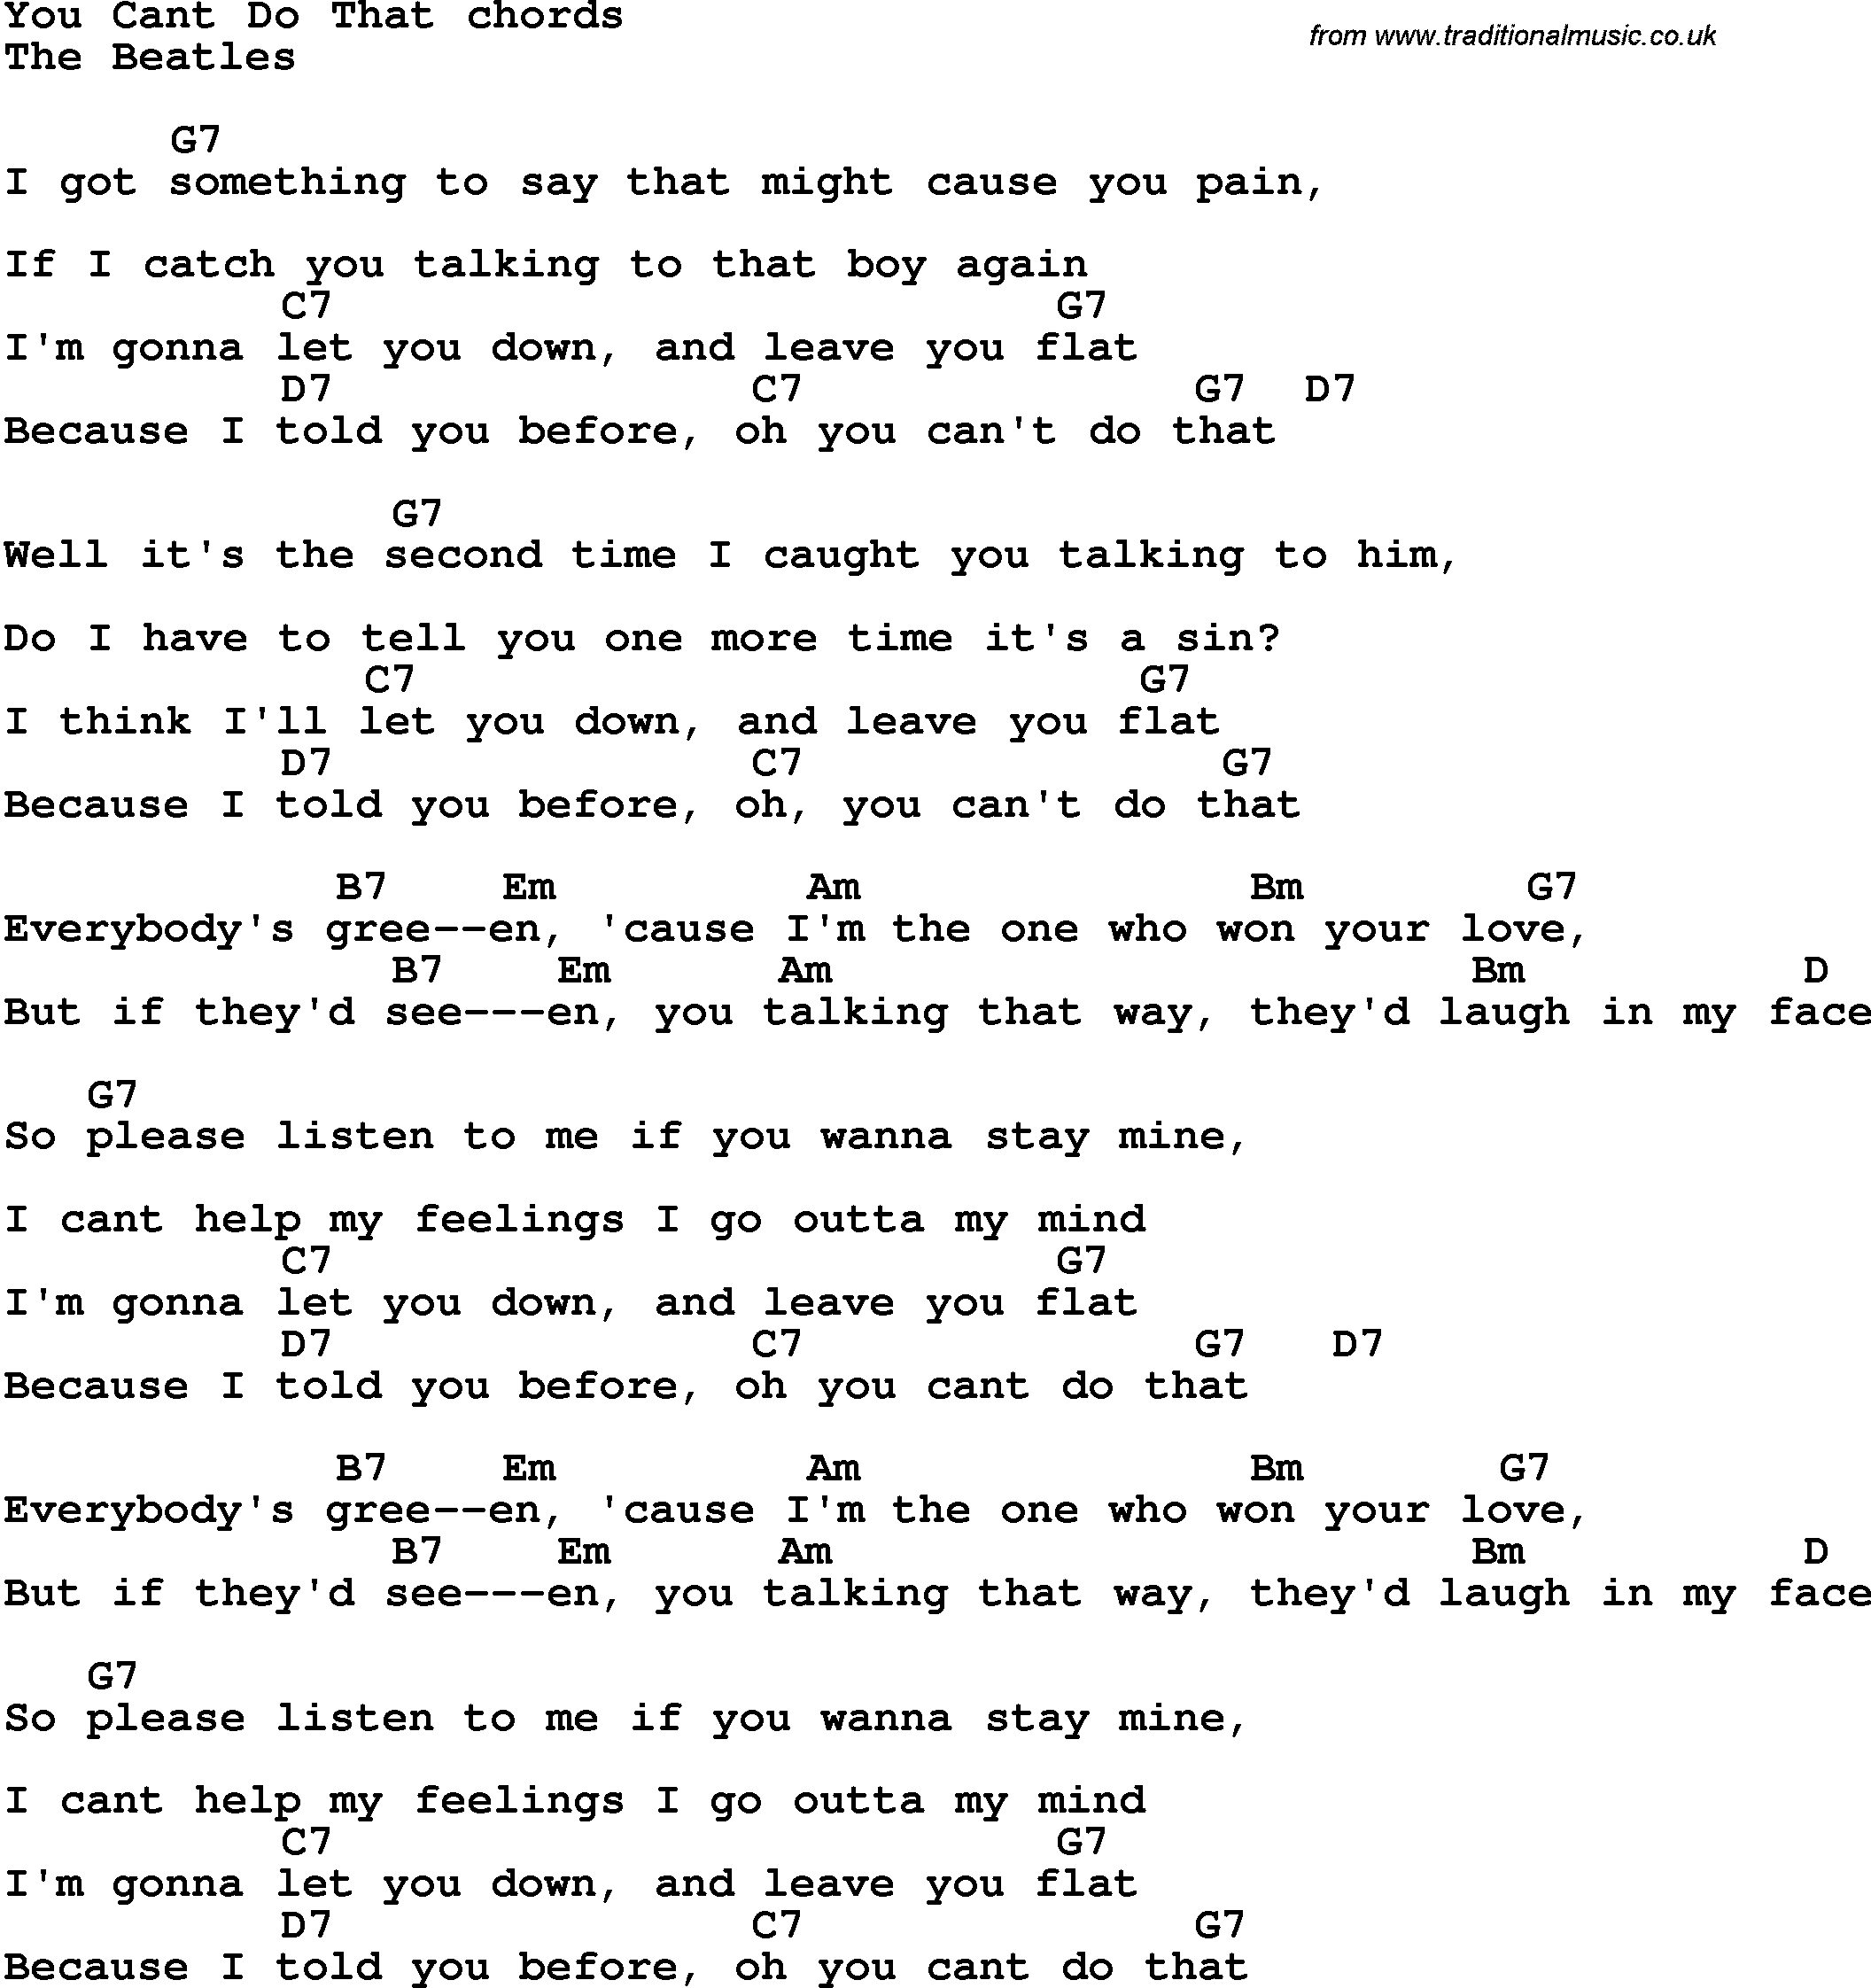 Song Lyrics with guitar chords for You Can't Do That